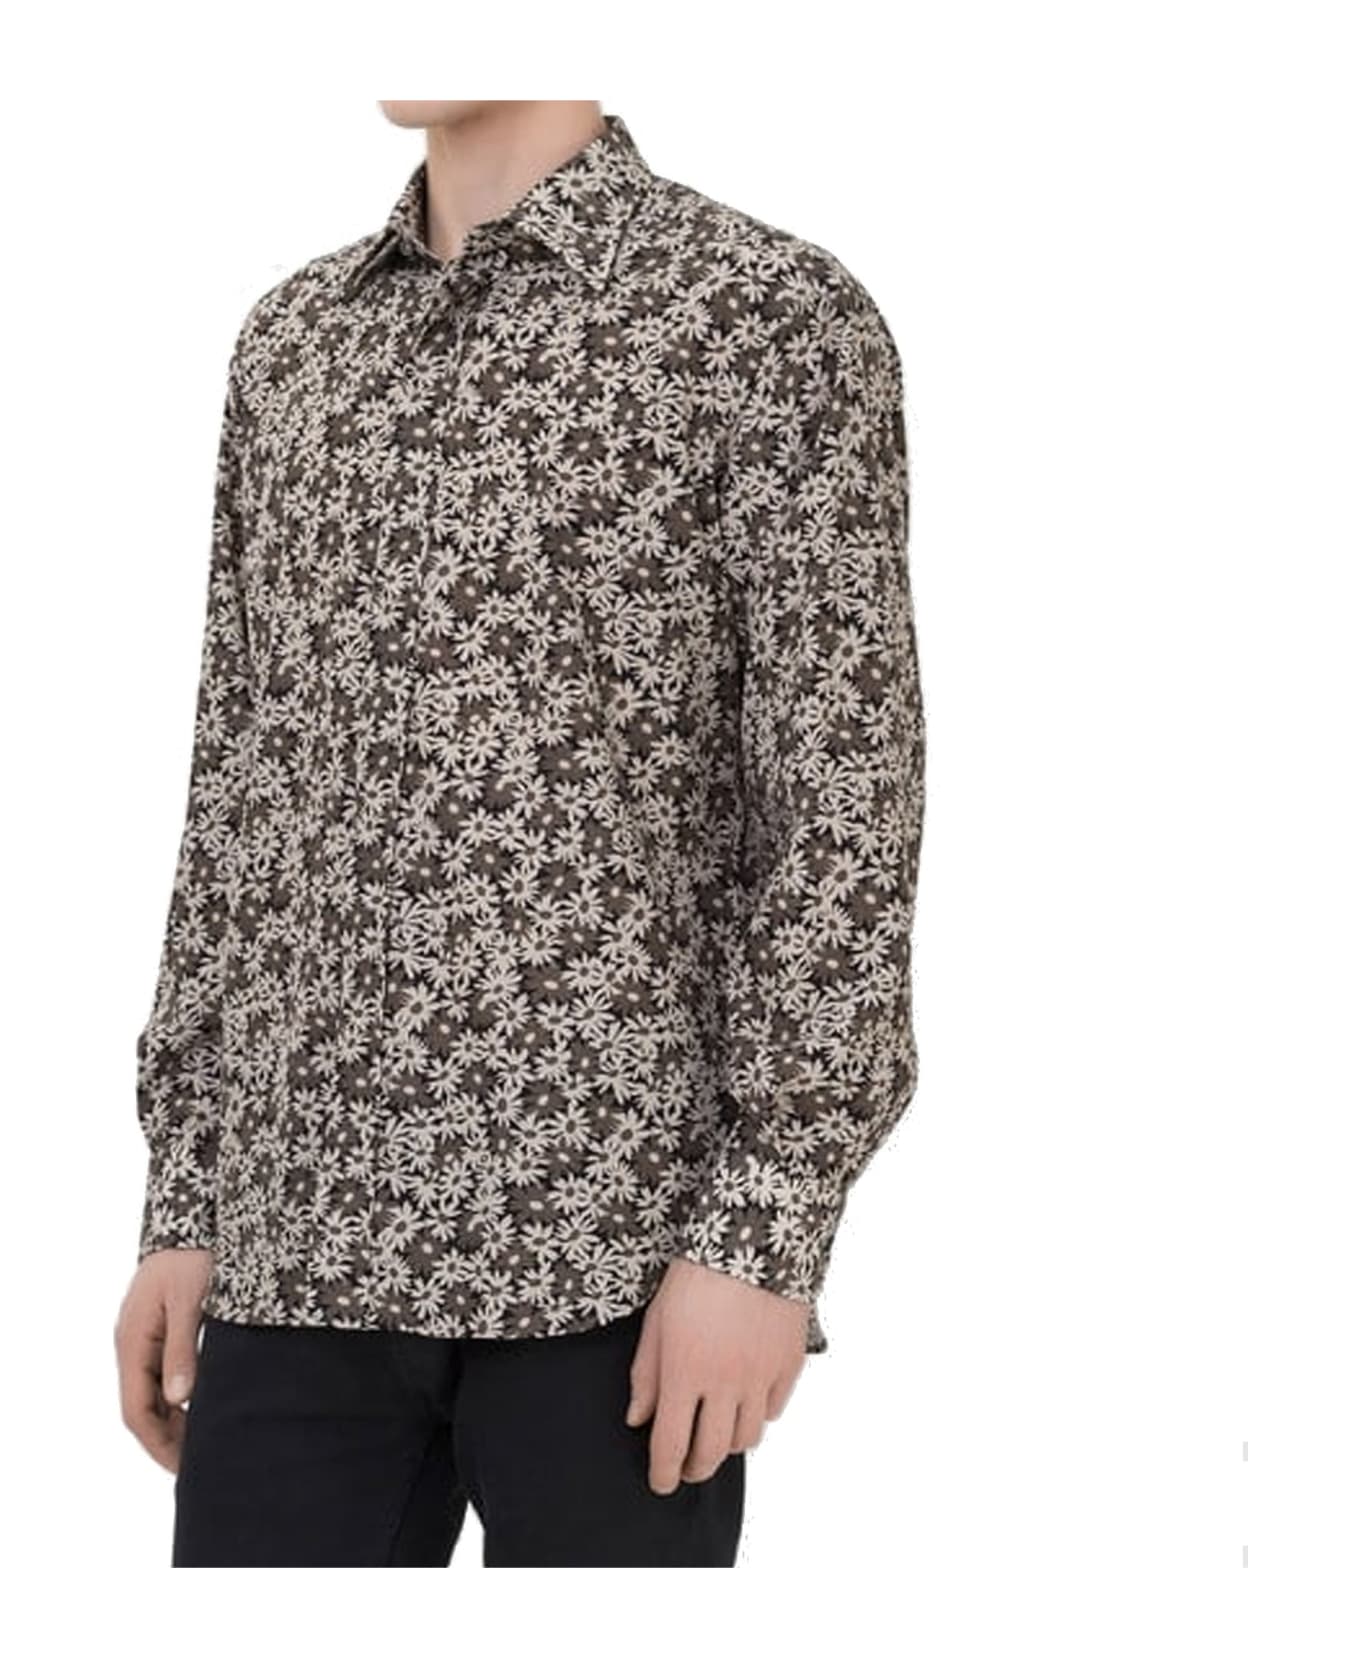 Tom Ford Floral Shirt - Green